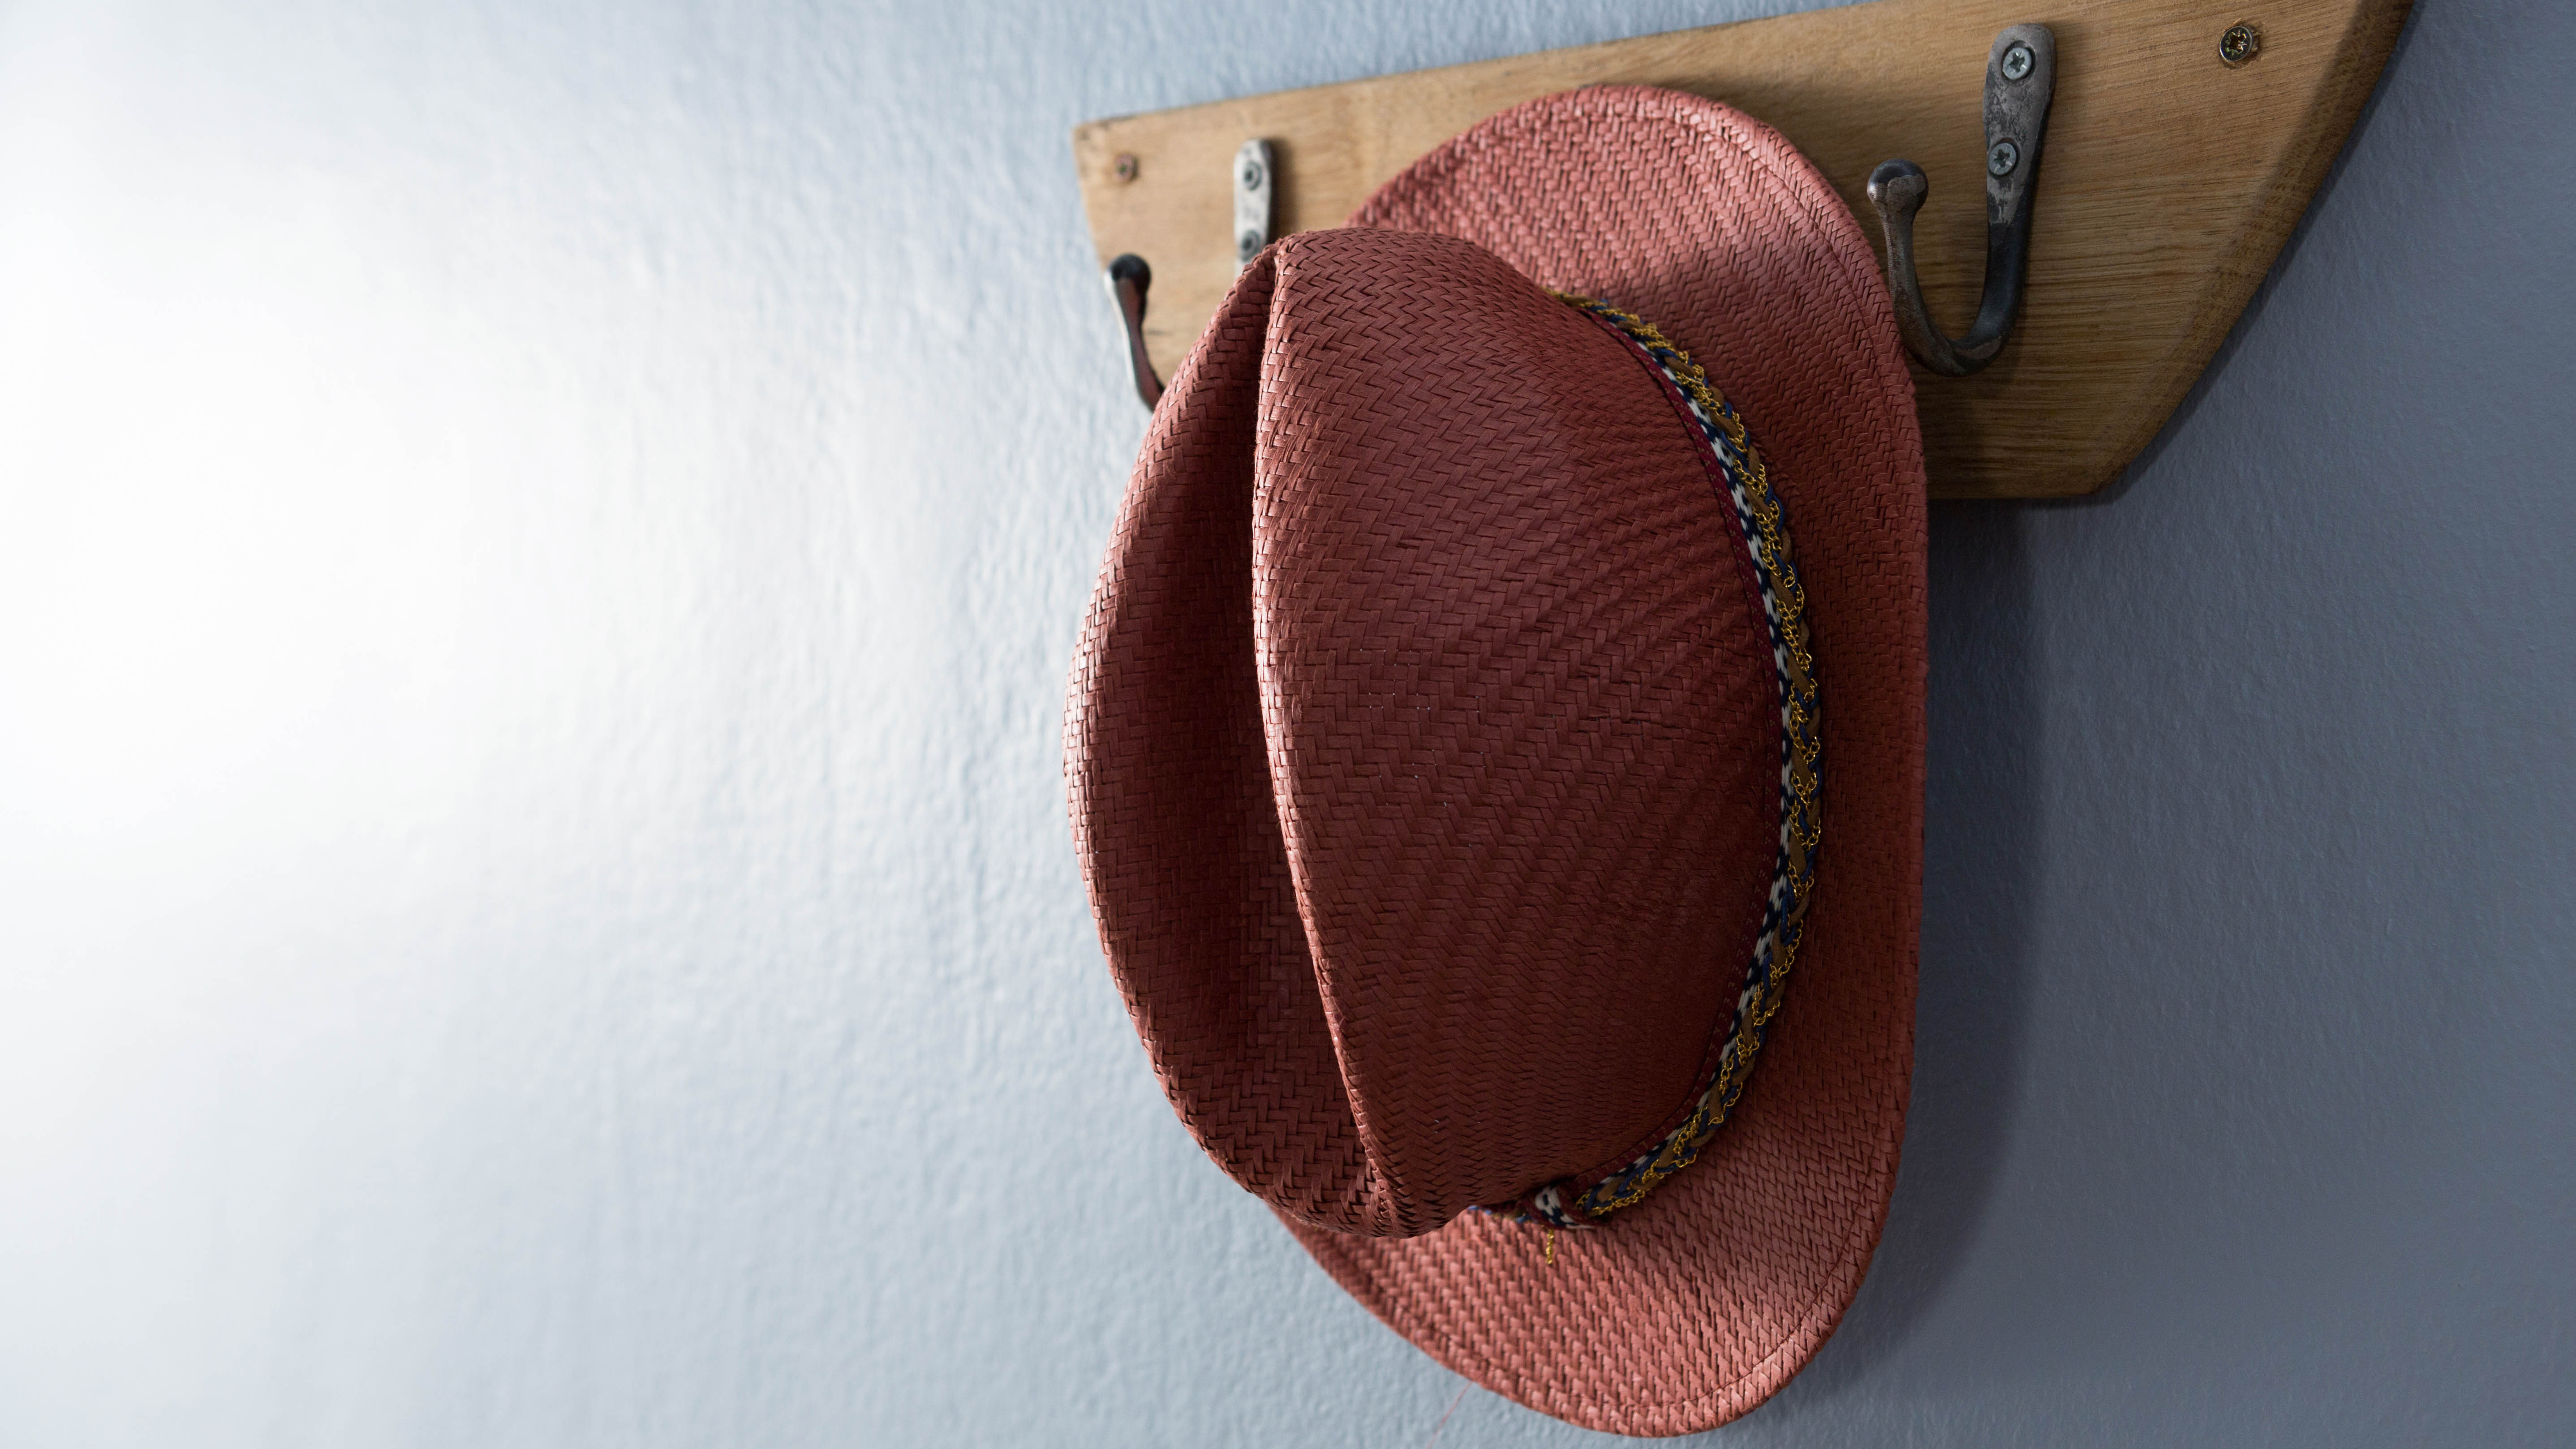 Straw hat hanging up on wall